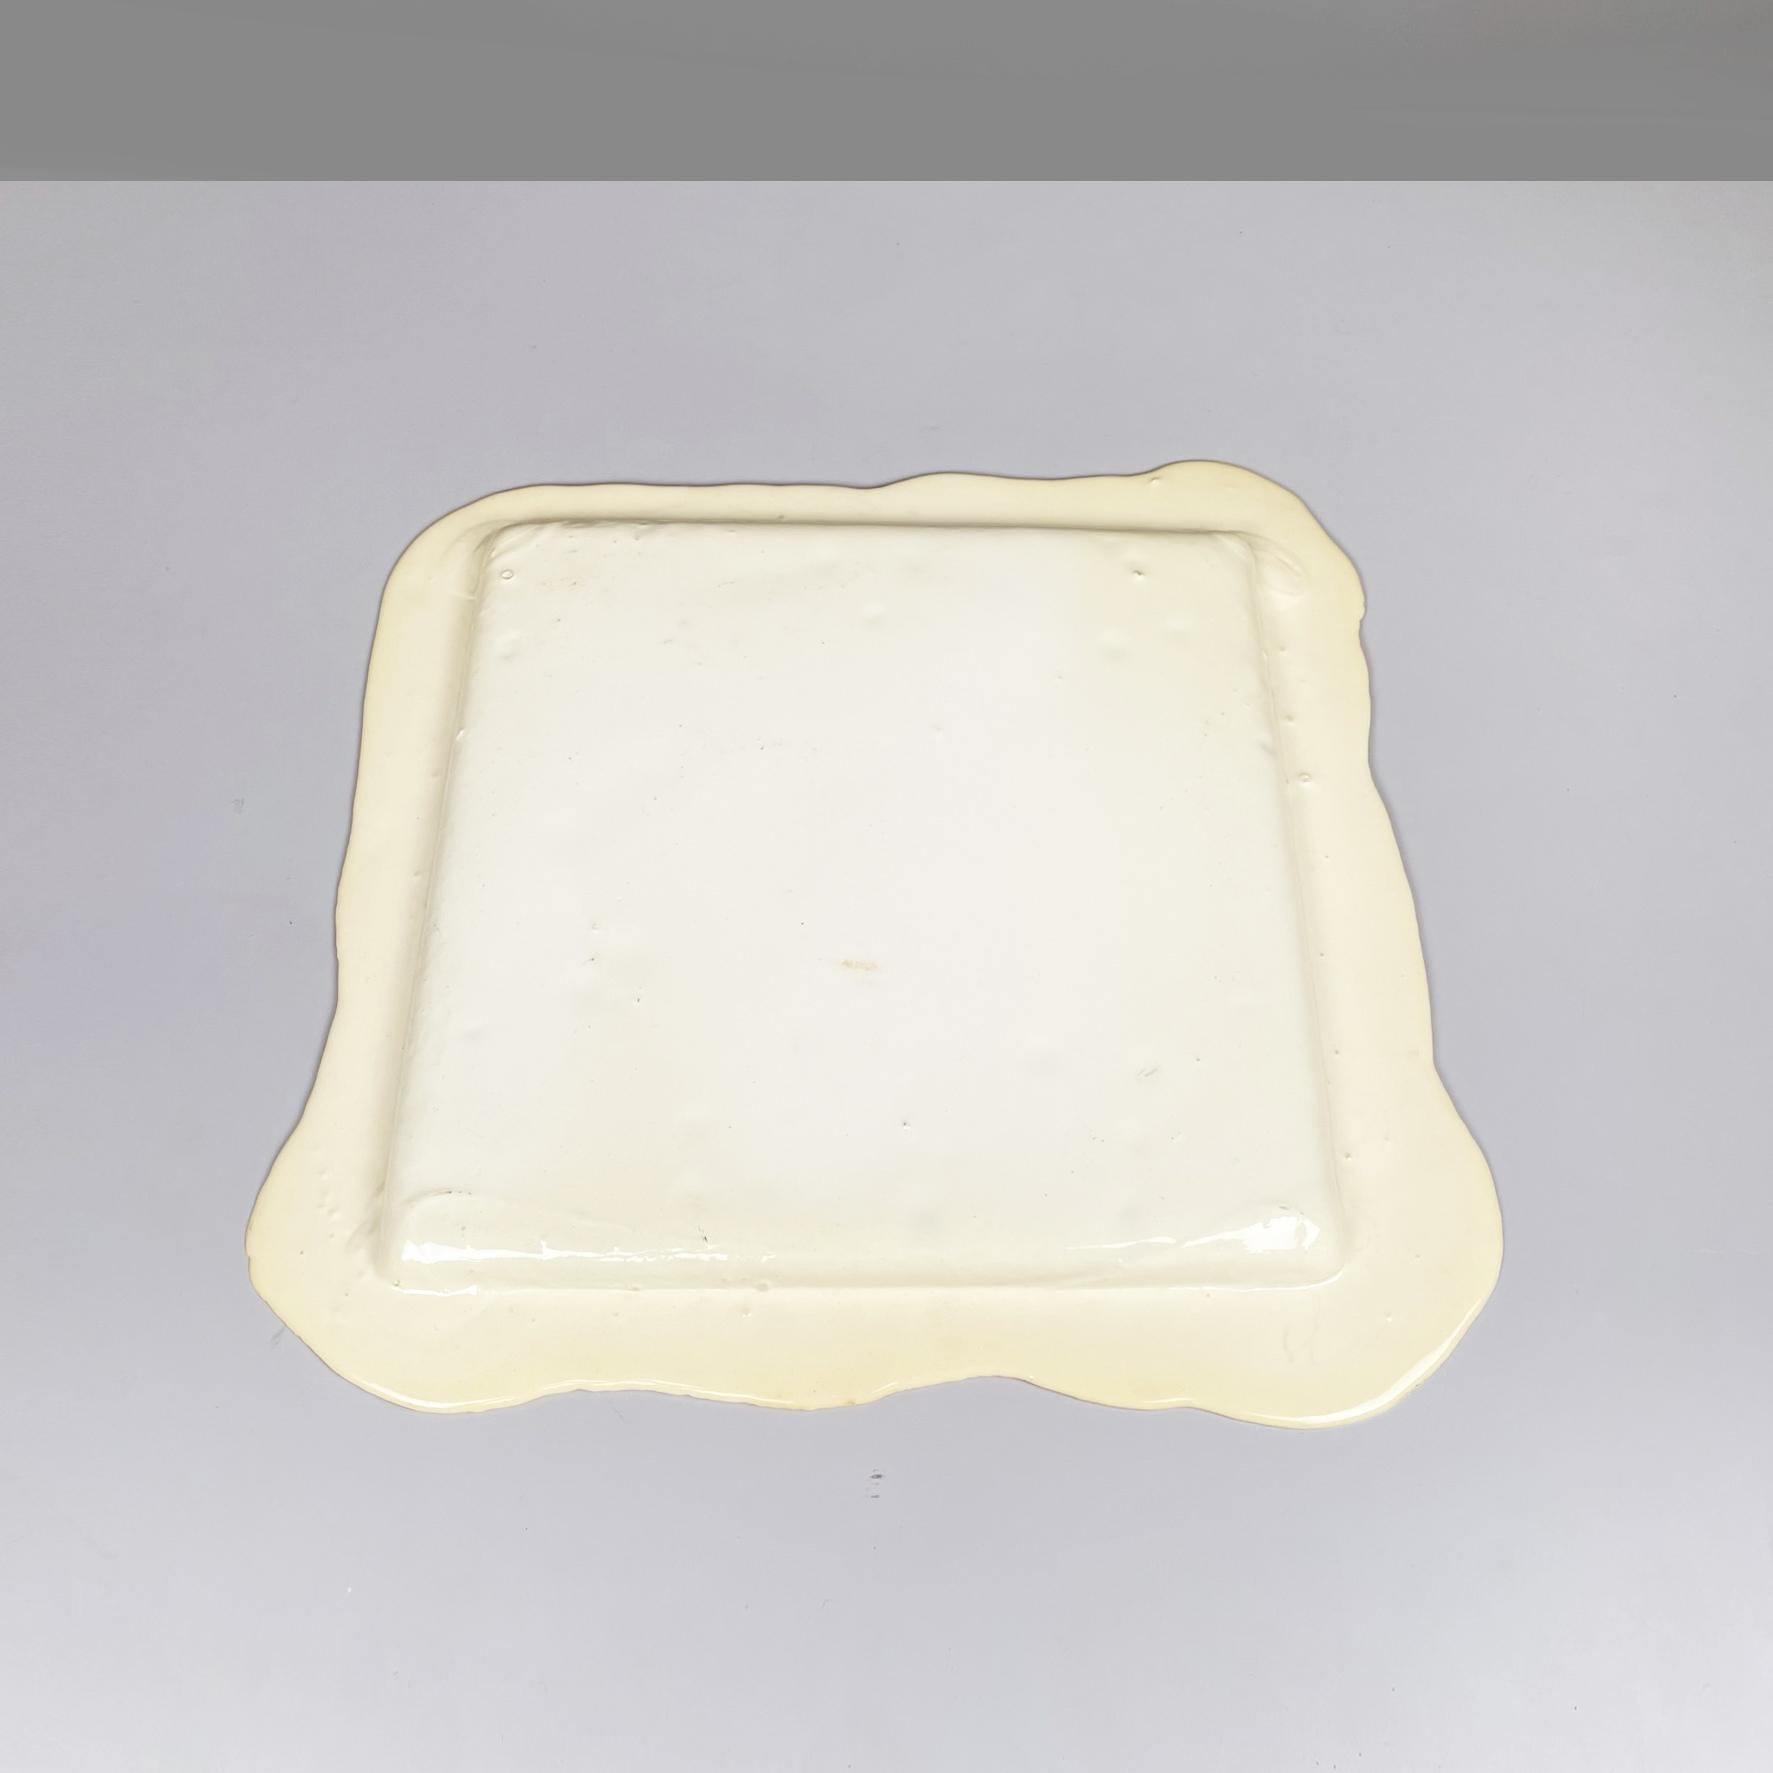 Contemporary Italian post-modern White Resin try-tray by Gaetano Pesce for Fish Design, 2000s For Sale